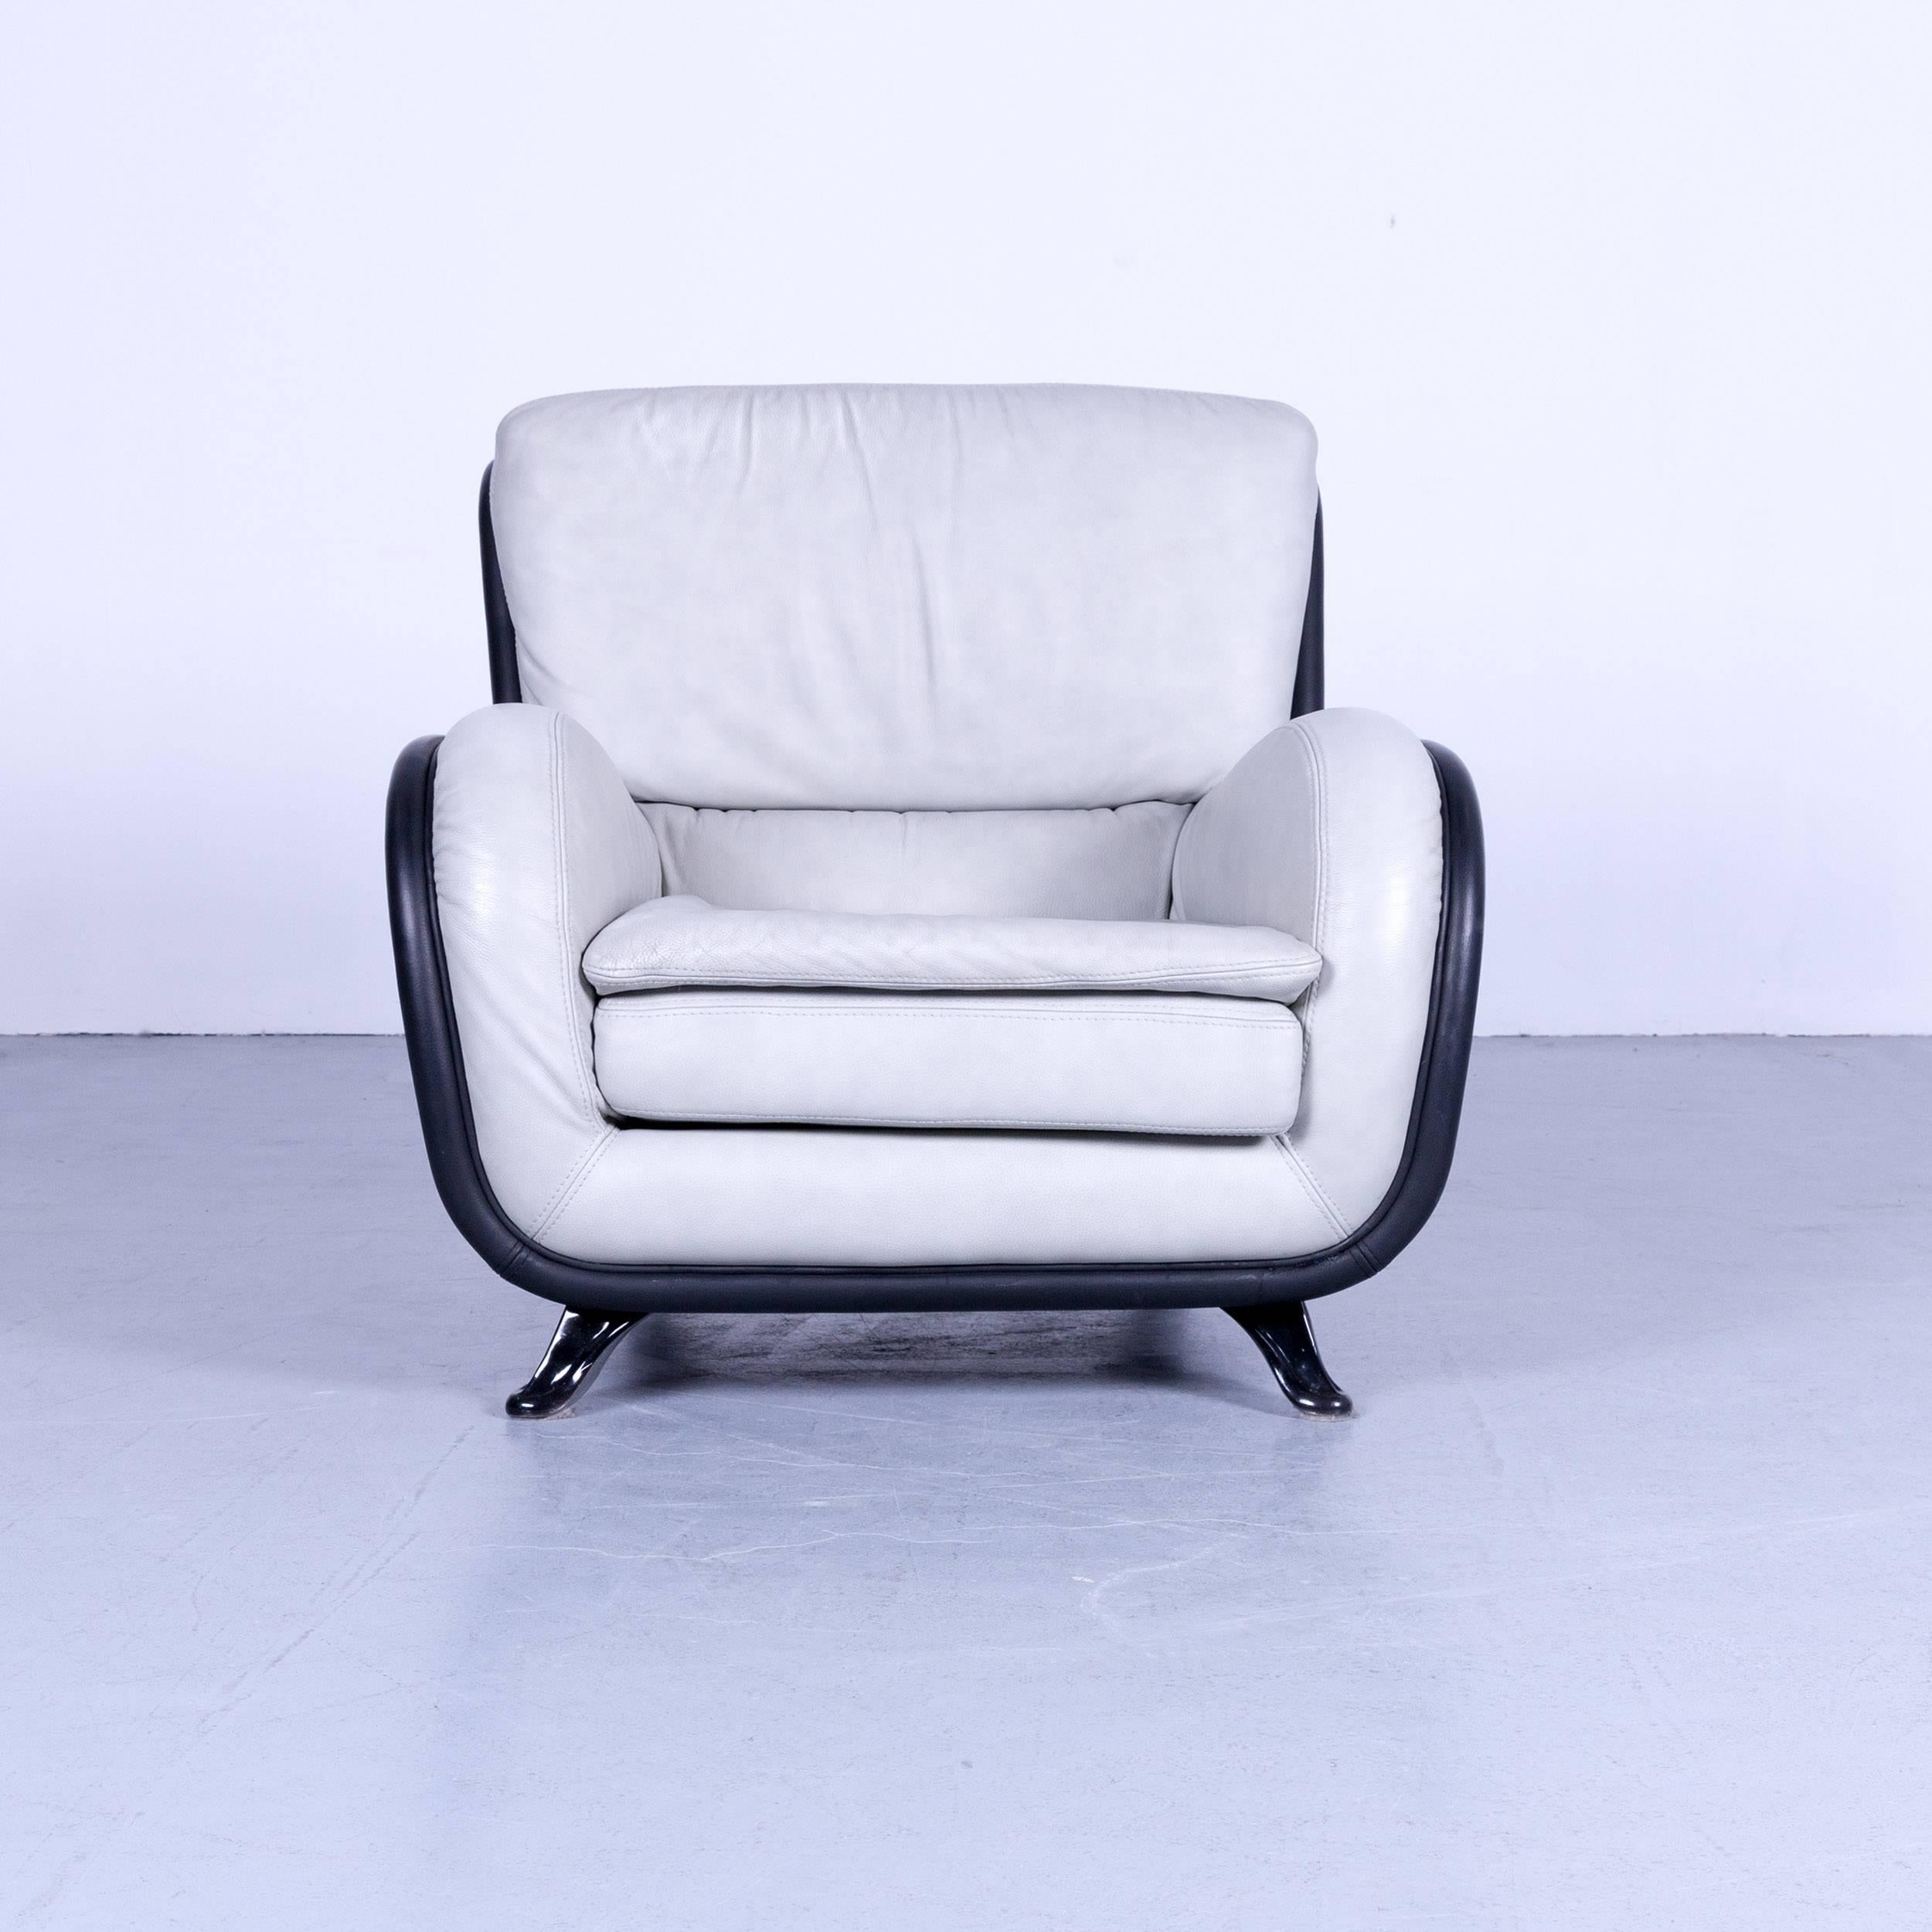 Nieri designer armchair made of leather in a minimalistic and modern design.